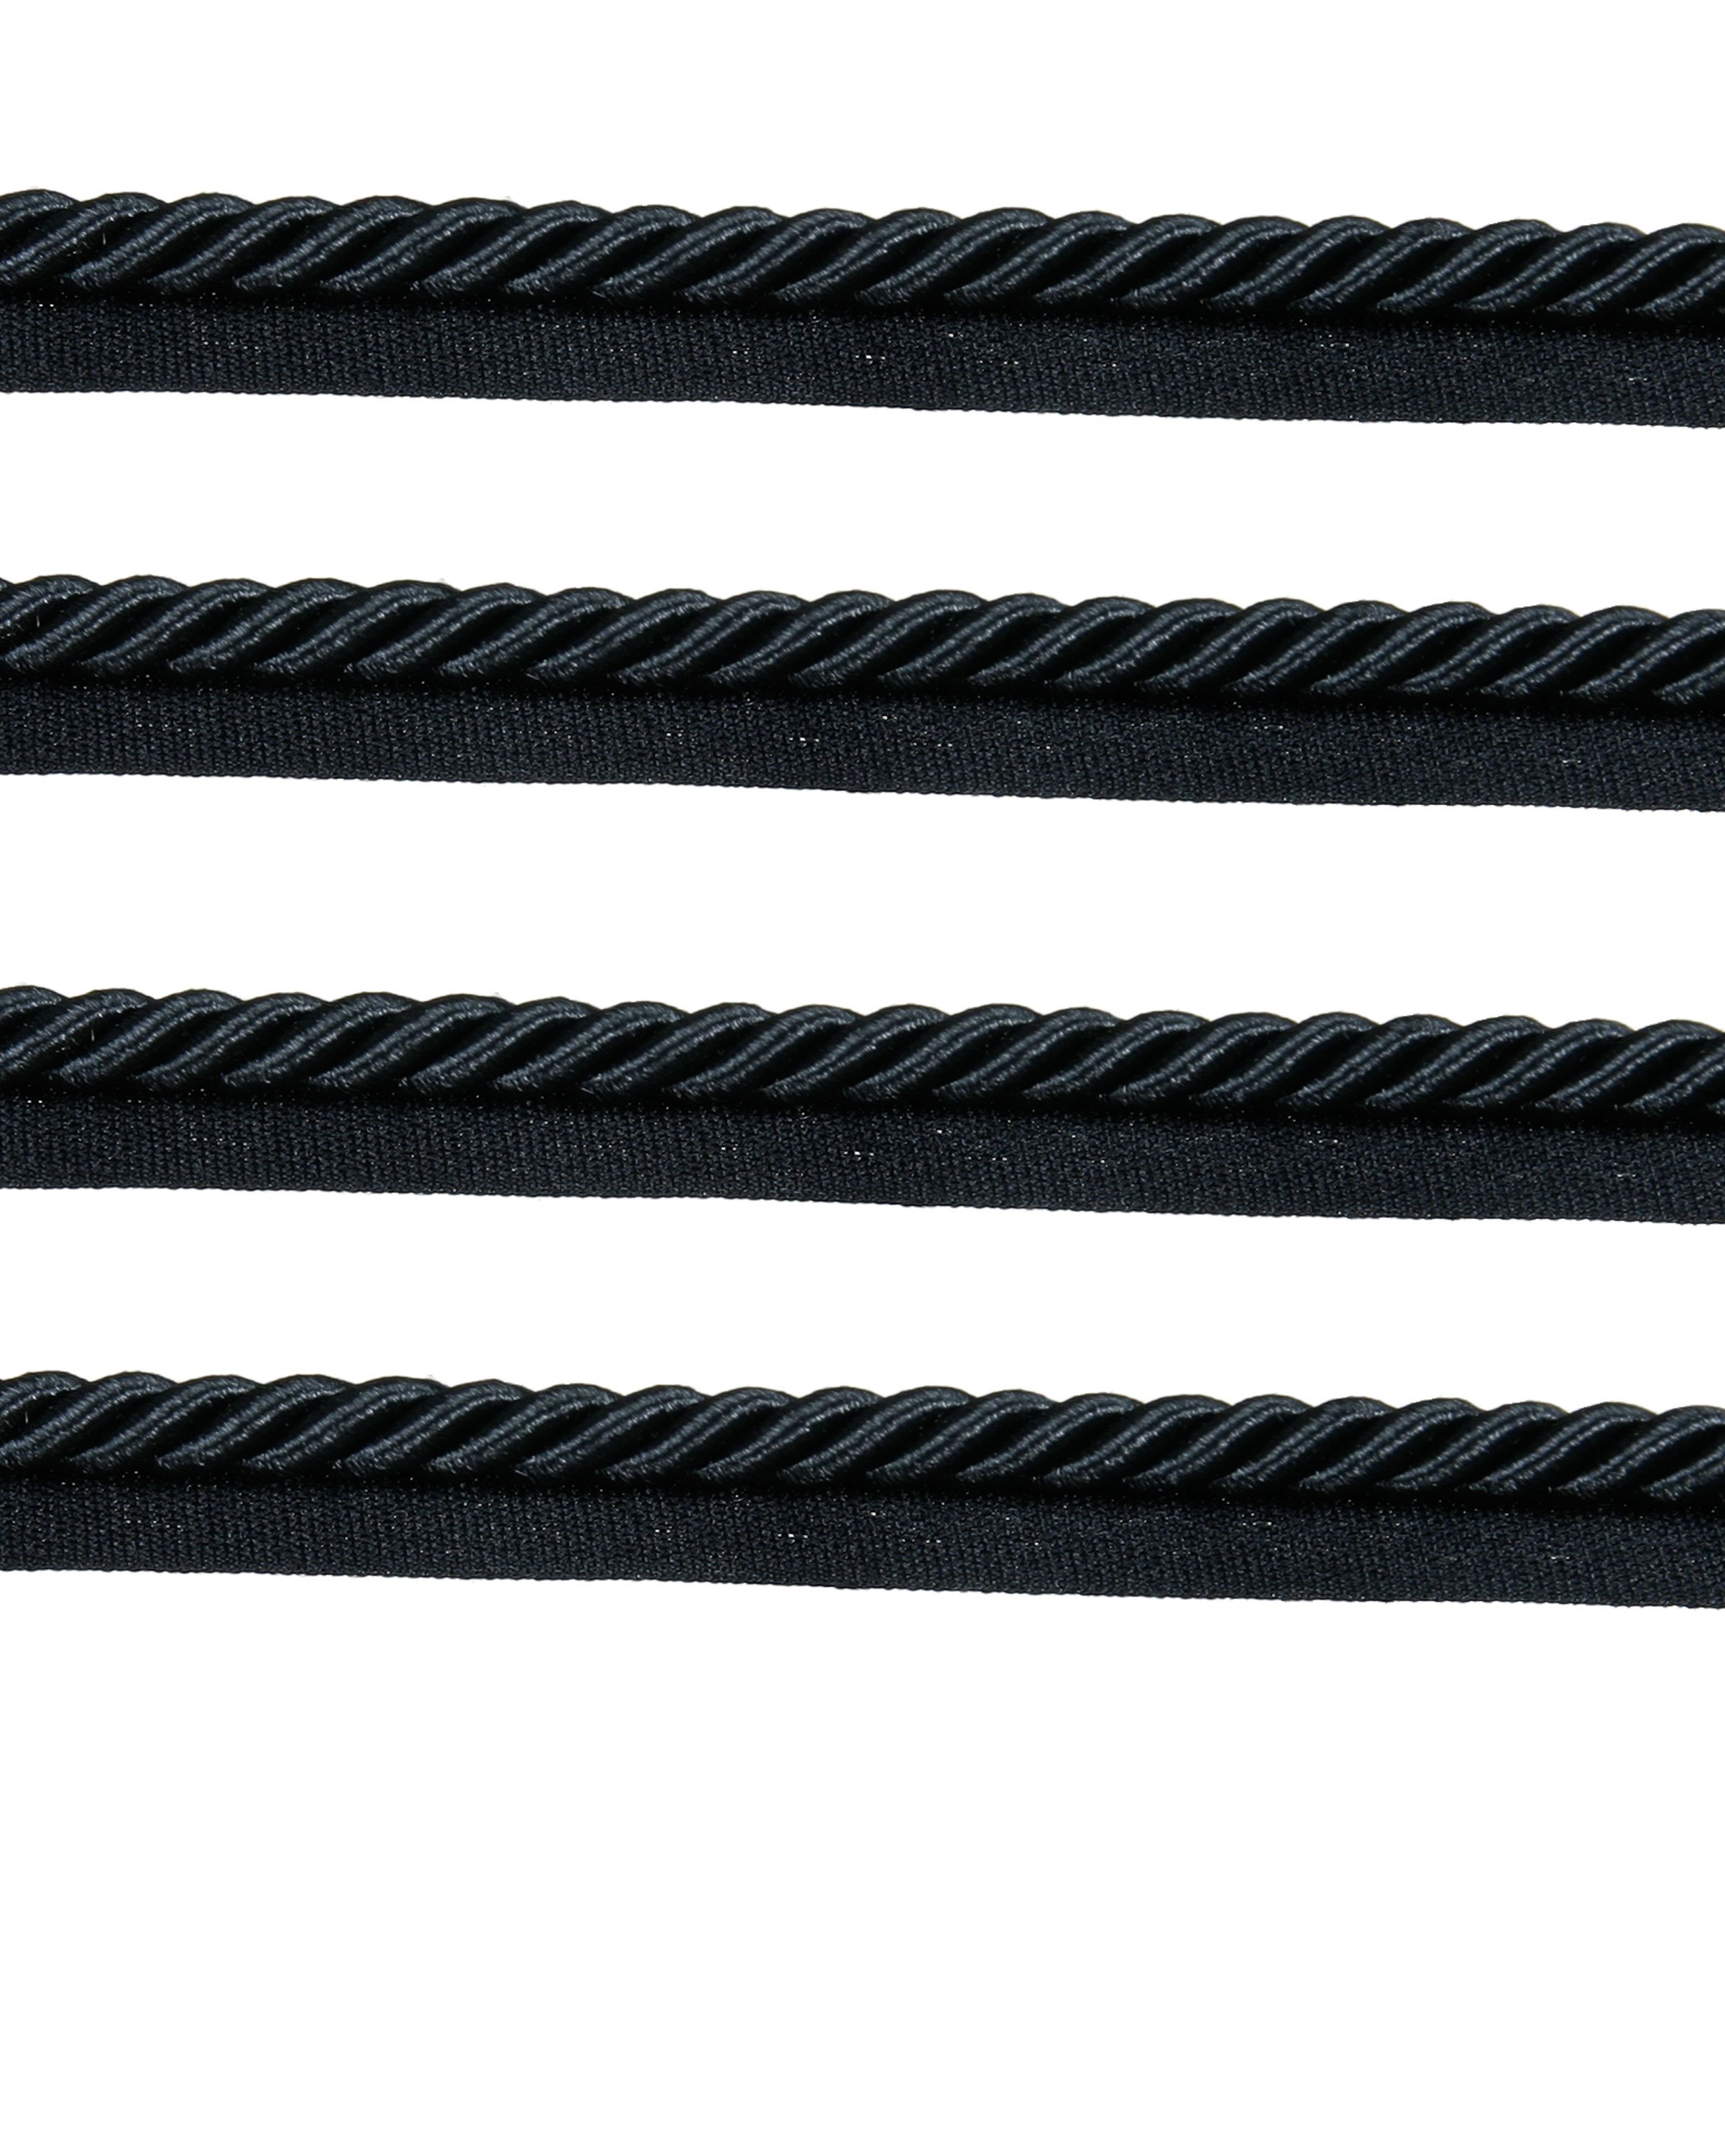 Piping Cord 8mm on Tape - Black Price is for 5 metres